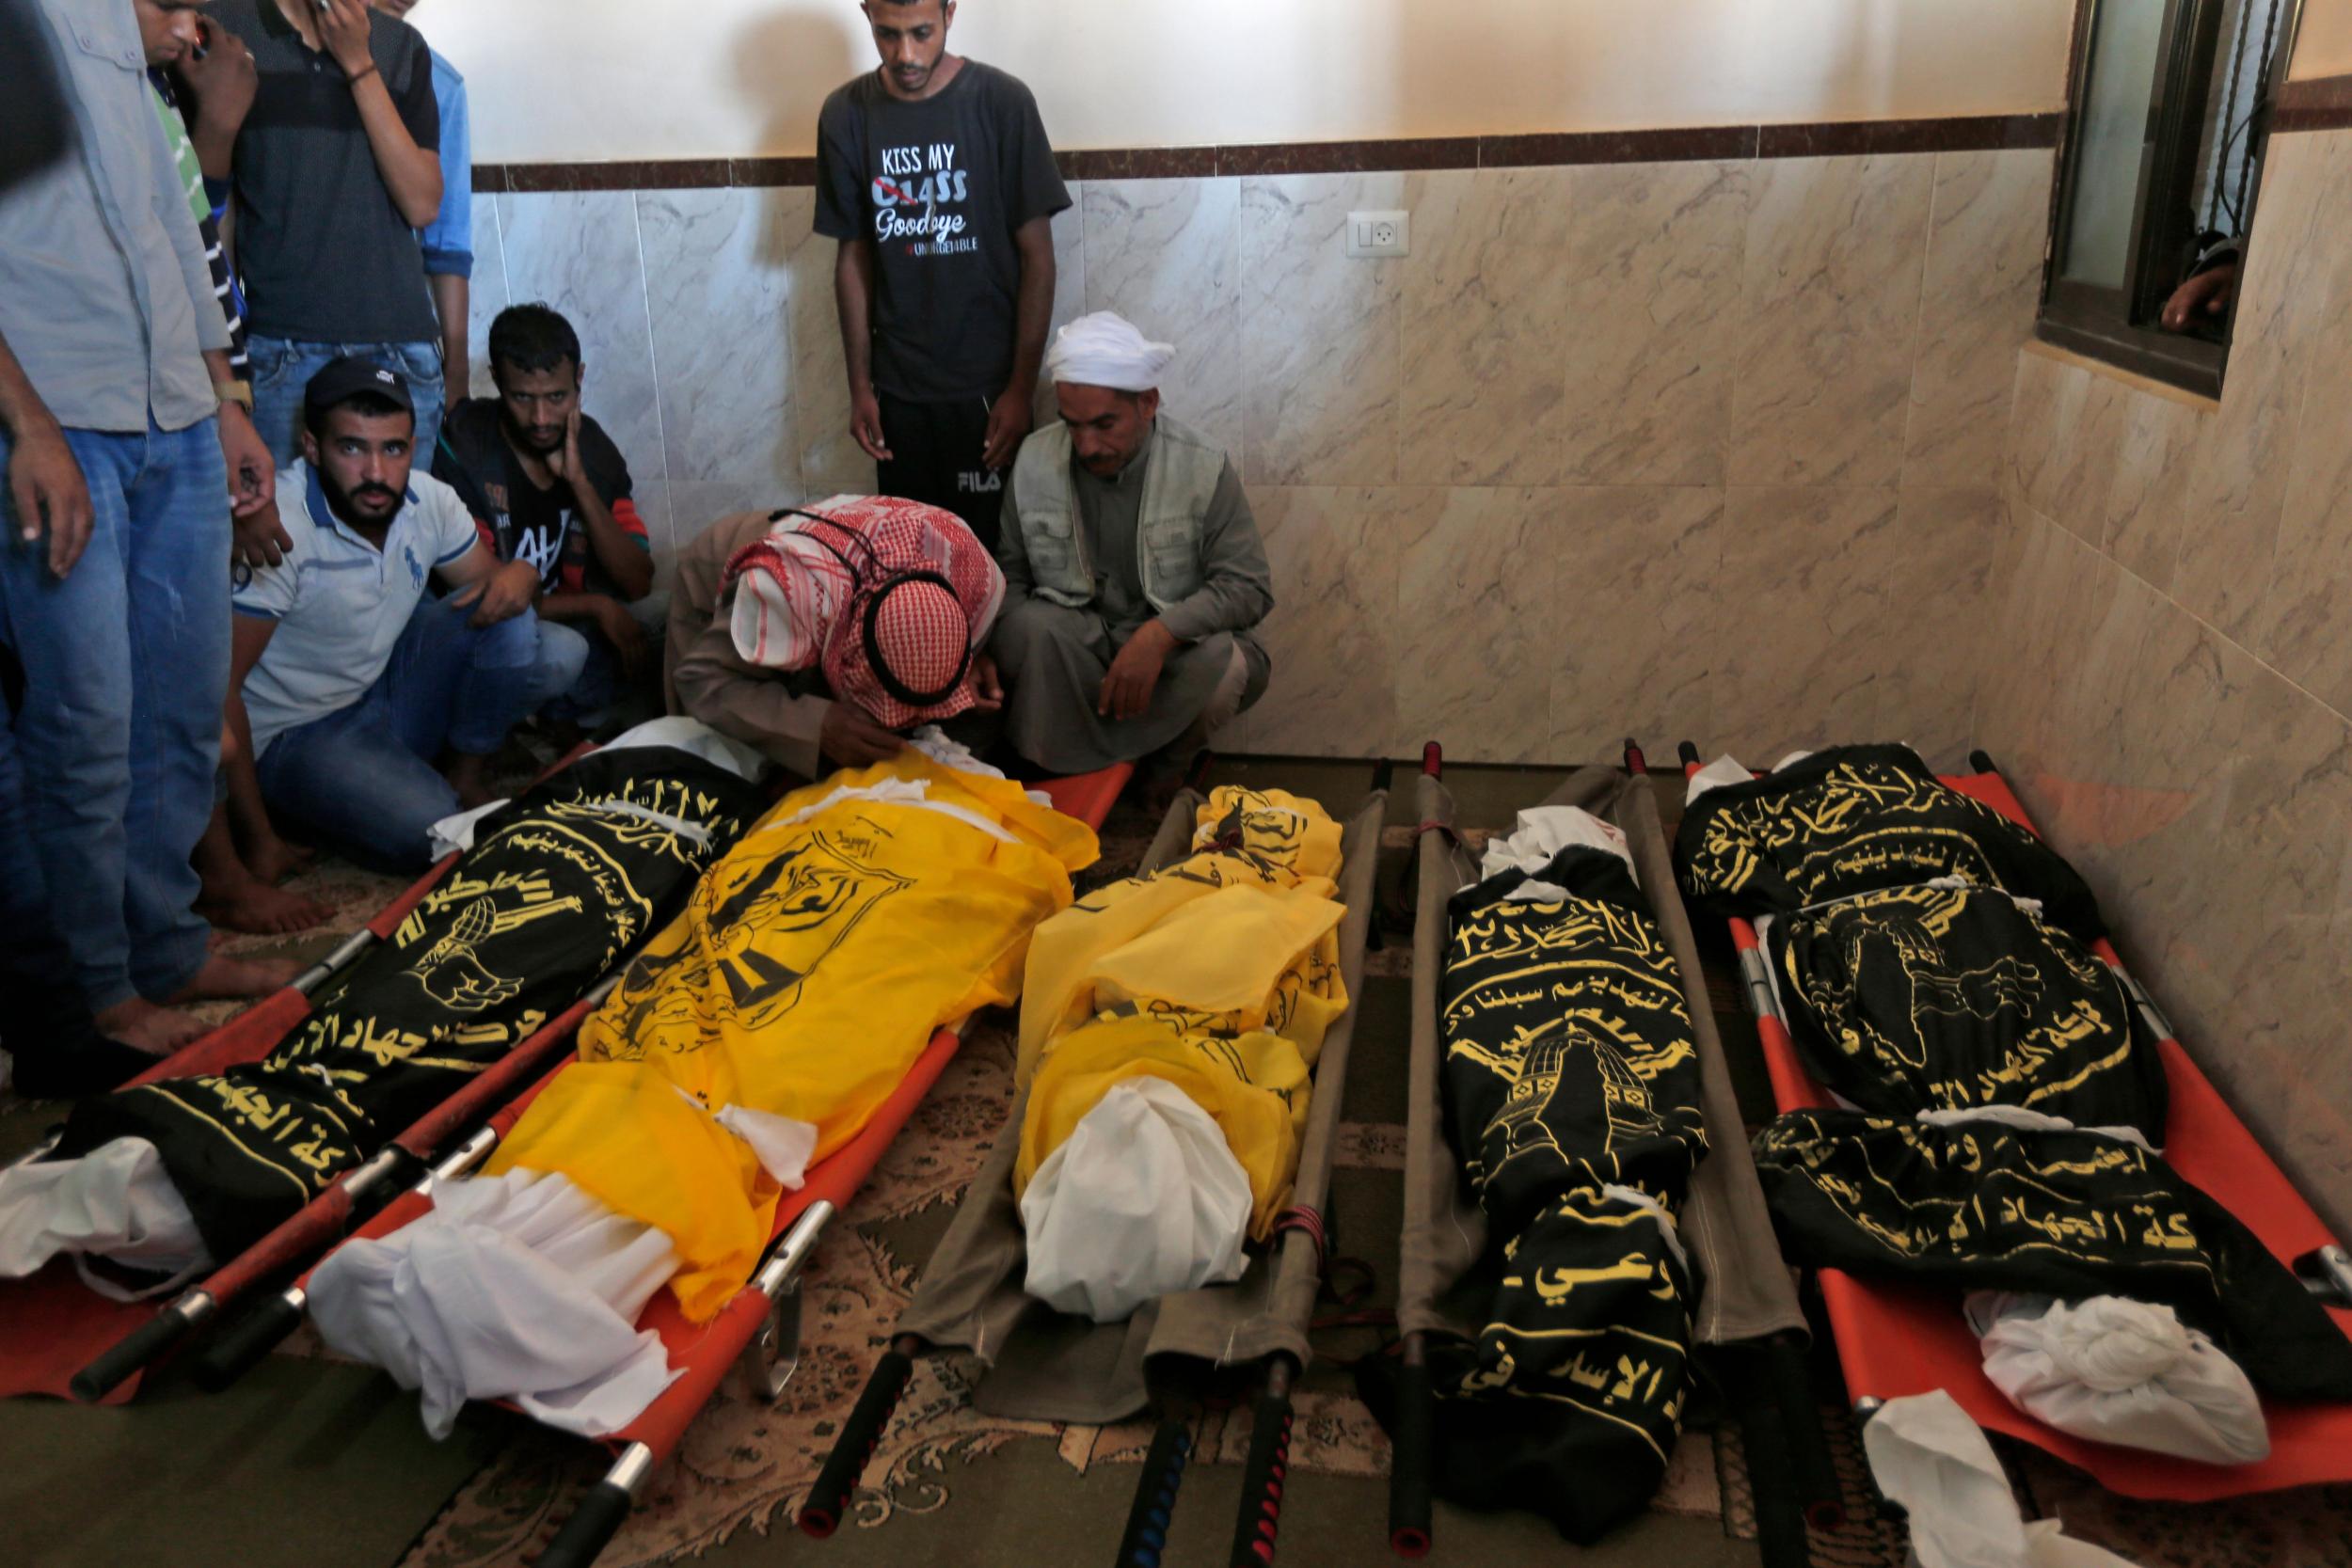 Palestinians mourn over the bodies of members of a family who were killed in an Israeli airstrike in Deir al-Balah